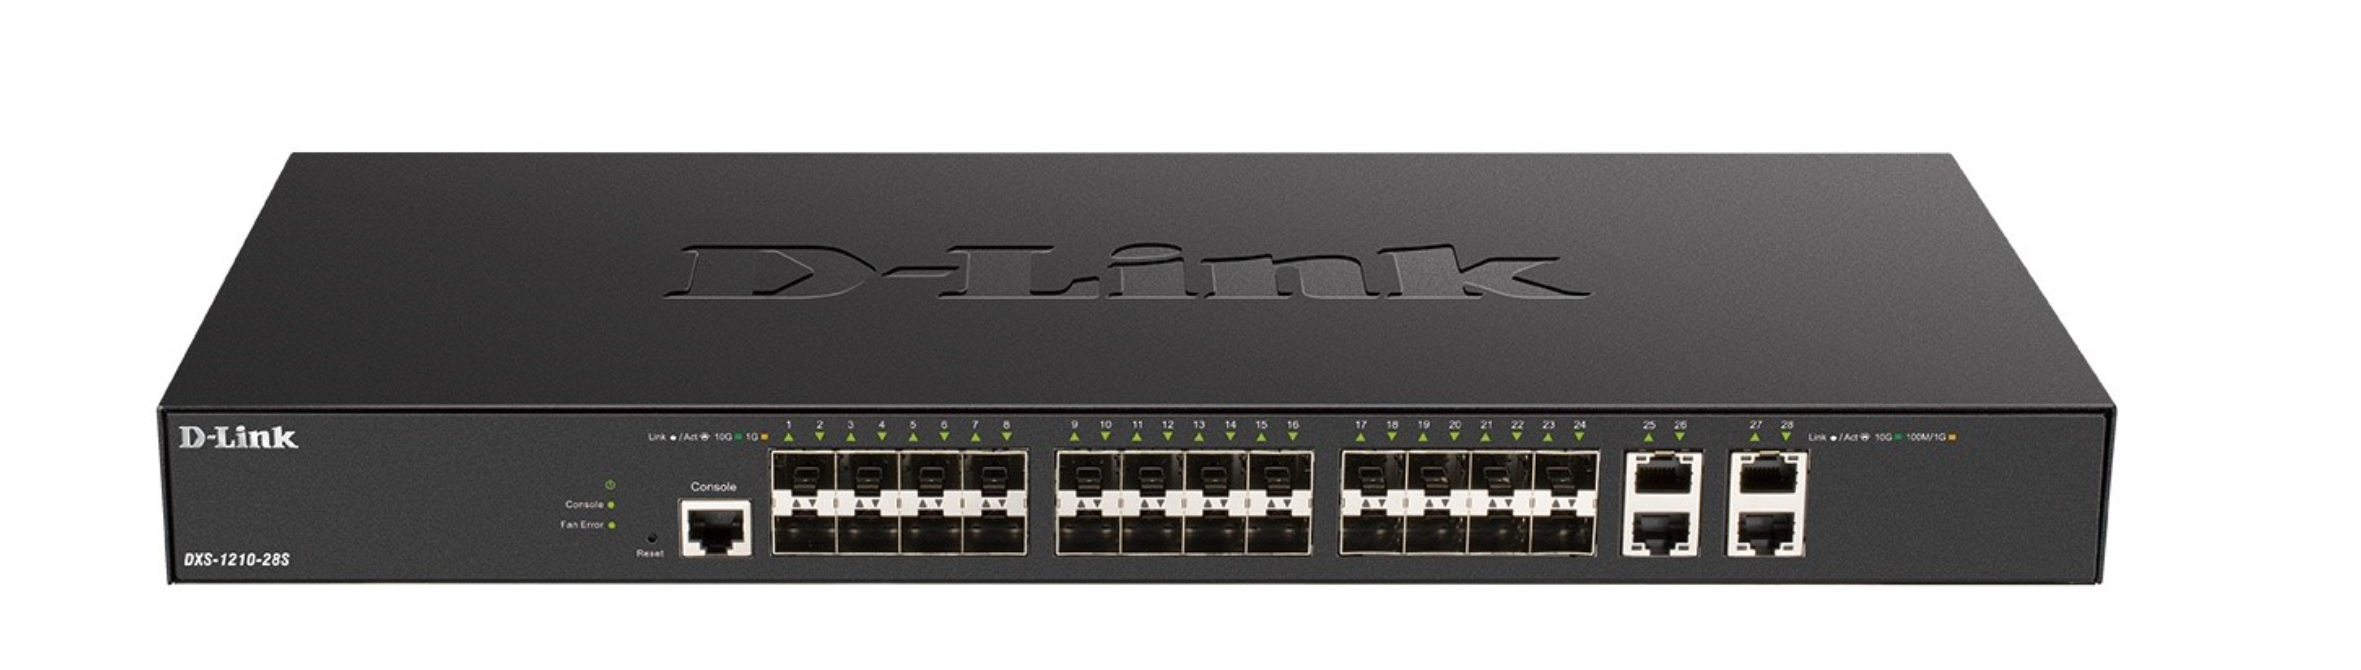 28s 10 Gigabit Smart Managed Switches From D Link